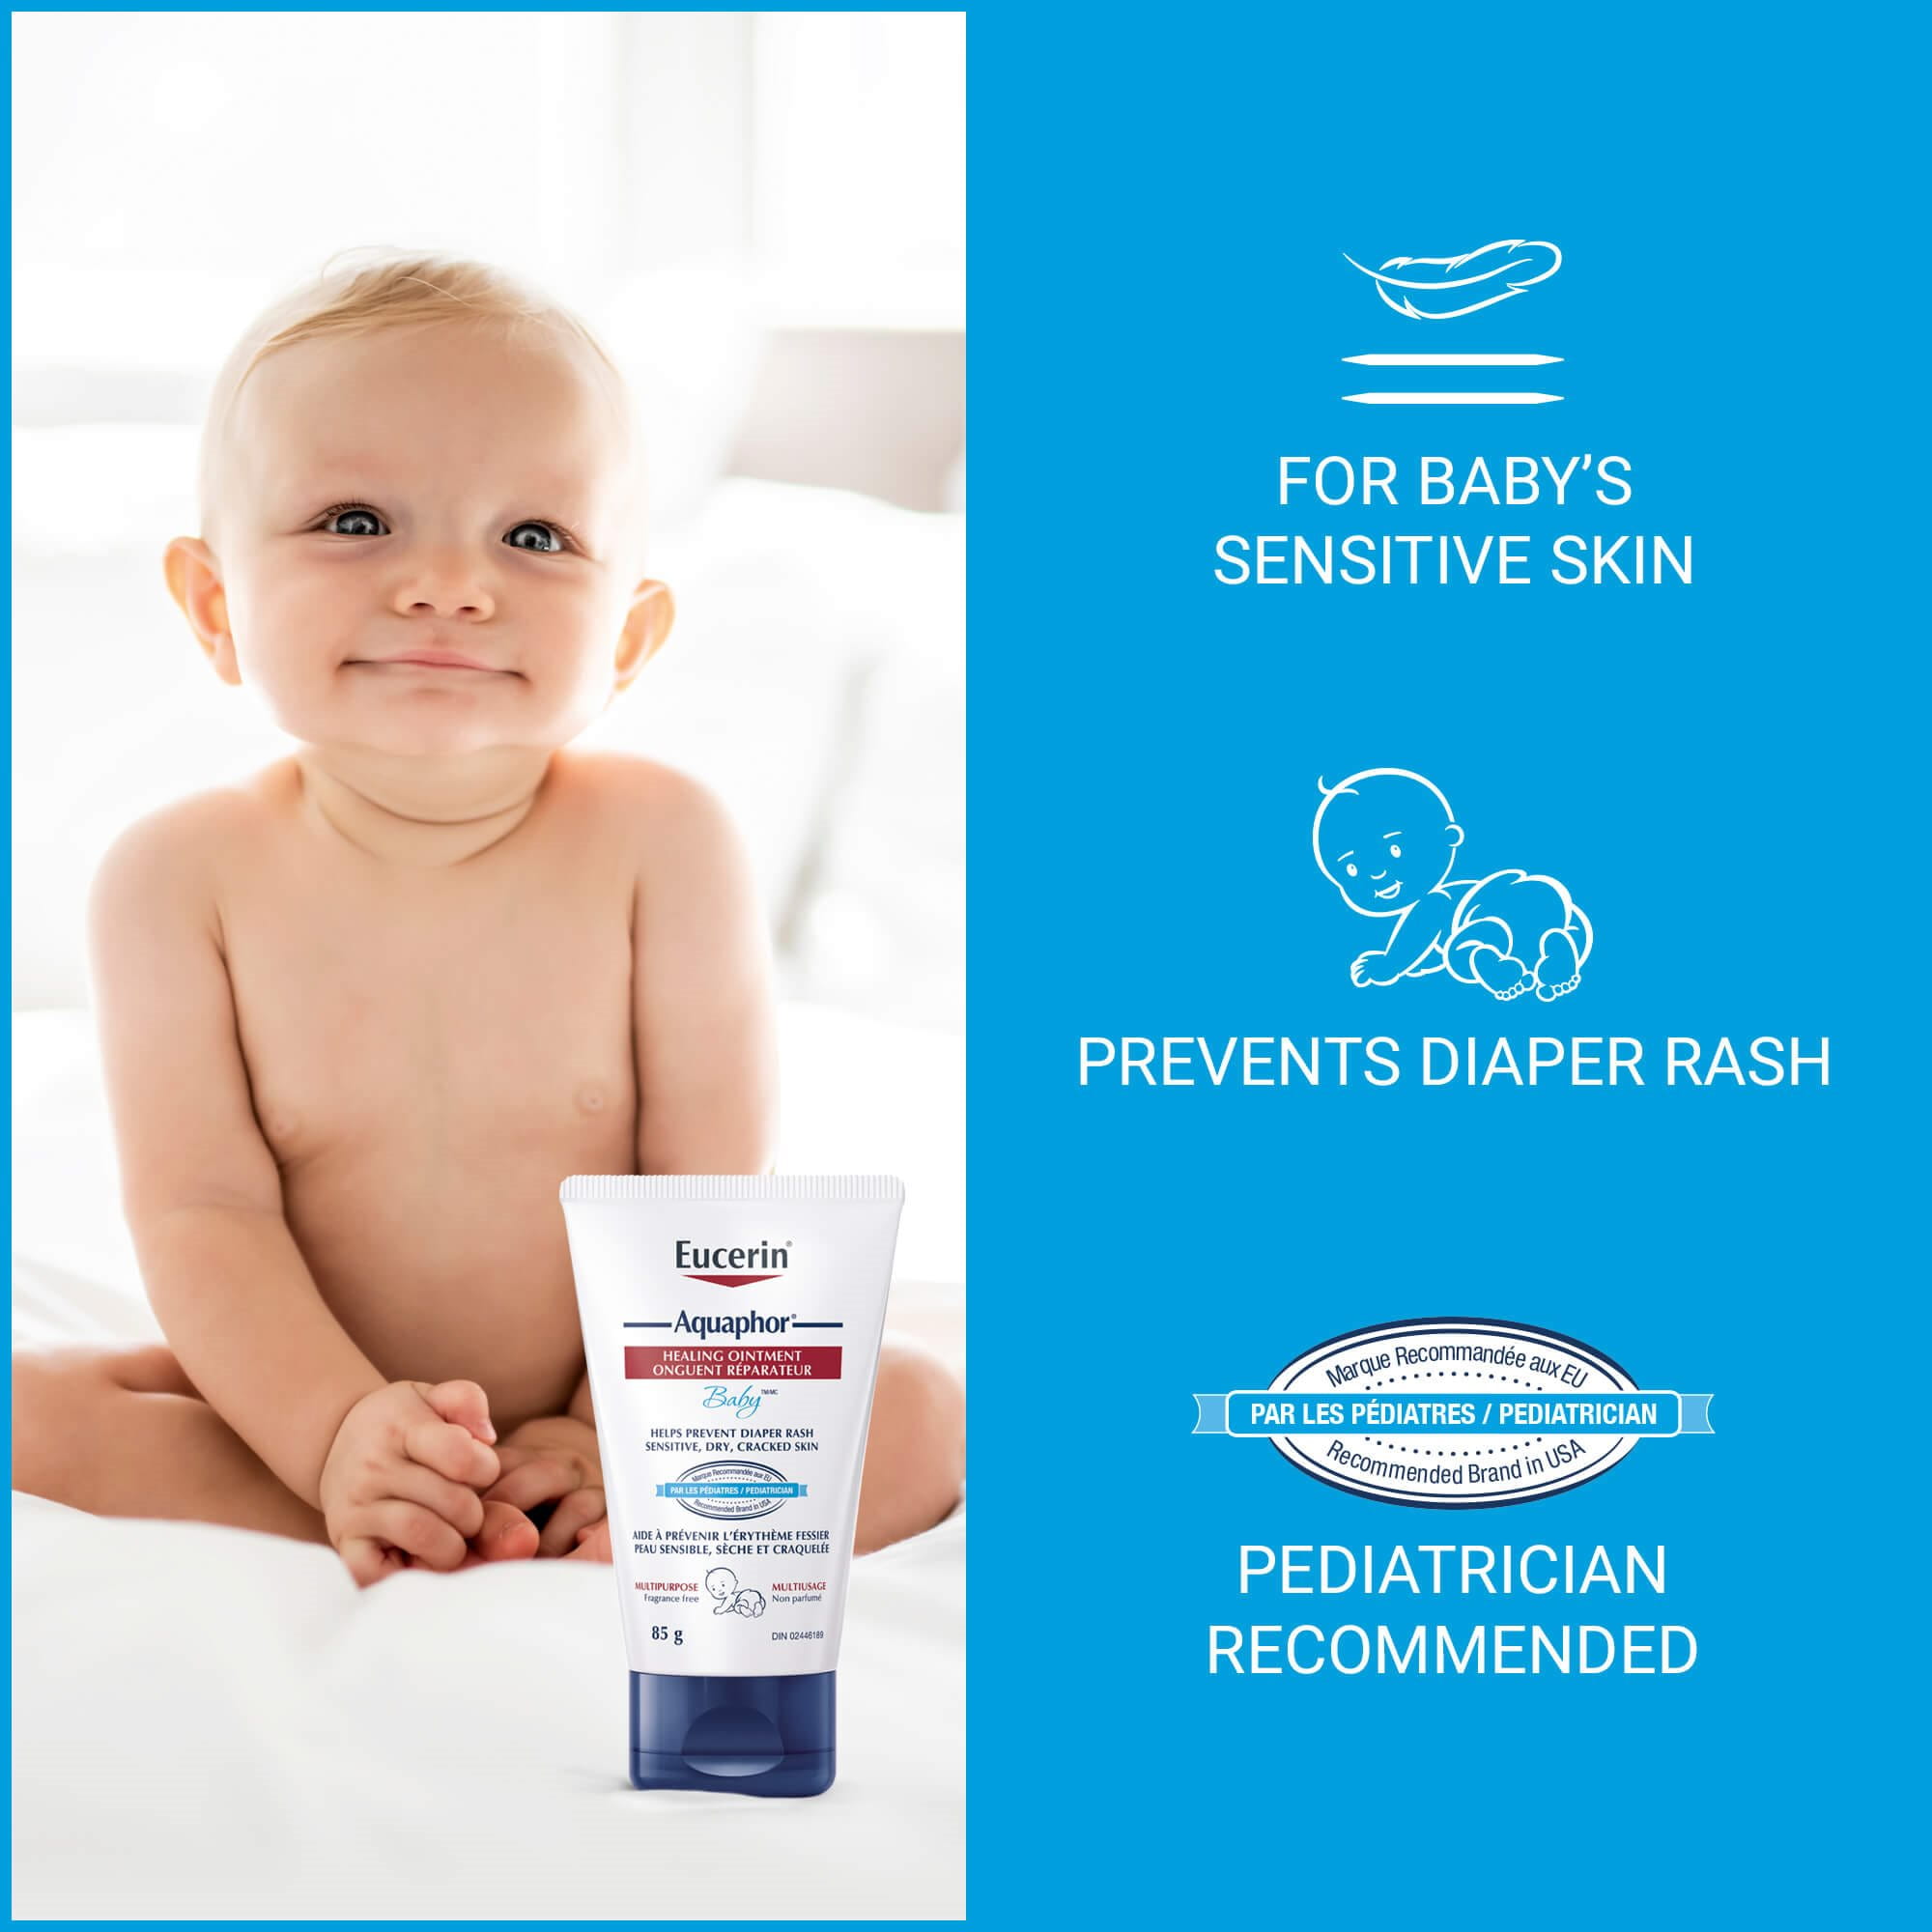 View of a smiling baby with Eucerin Aquaphor healing ointment product in front with a bedroom in the background.